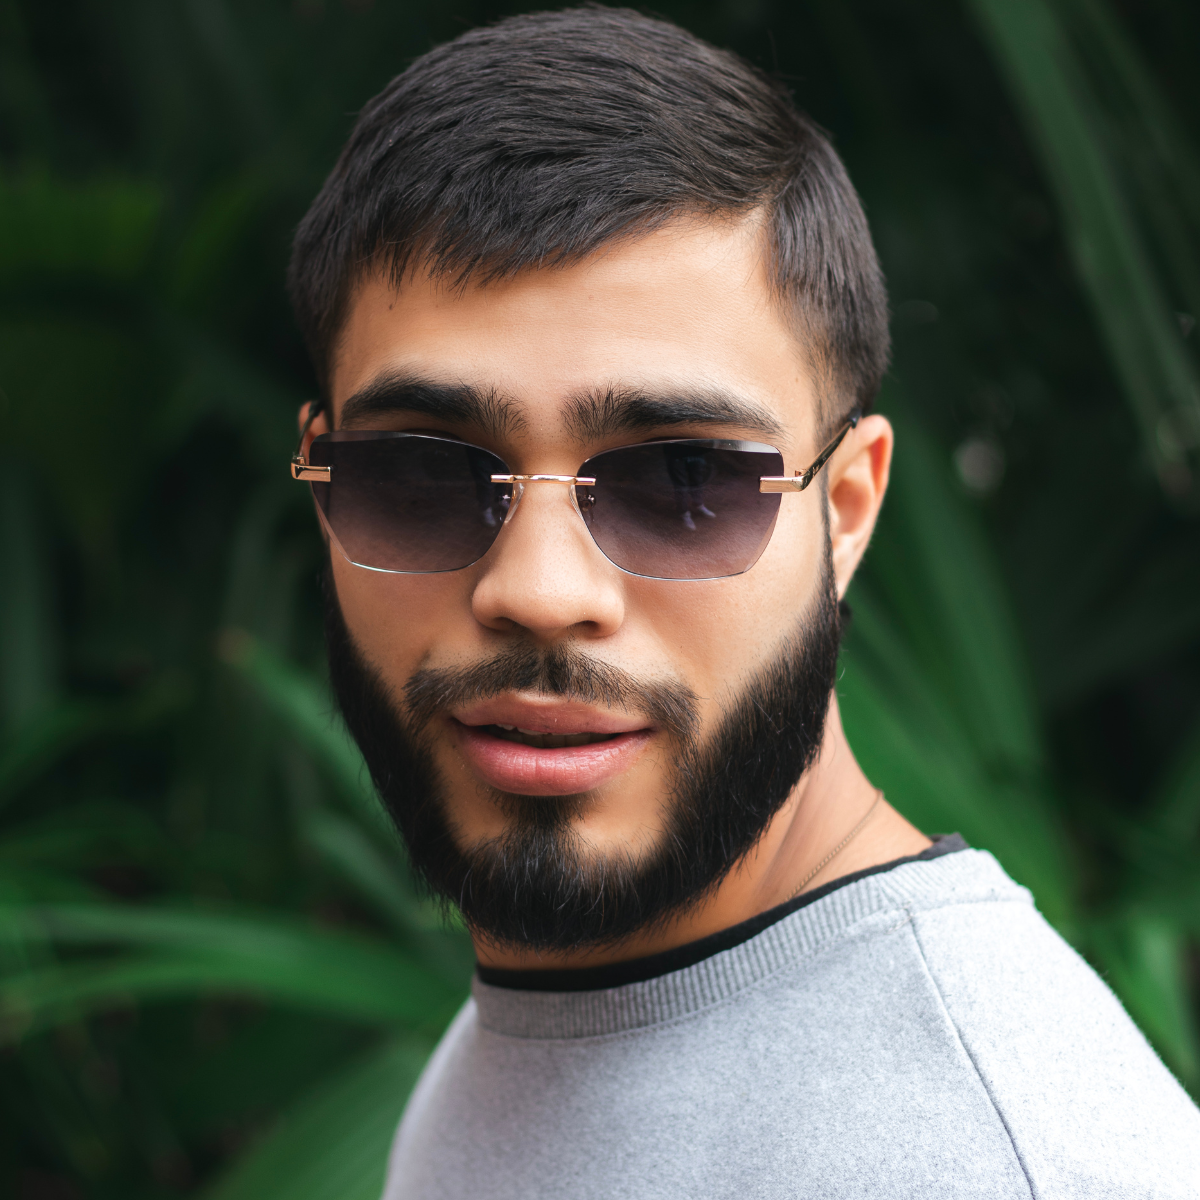 rey. The 18k gold-plated frames with diamond cut detailing catch the light, complementing his stylish beard and contemporary attire. Lush foliage softly blurs in the background, emphasizing the luxurious and fashion-forward design of the rimless eyewear.